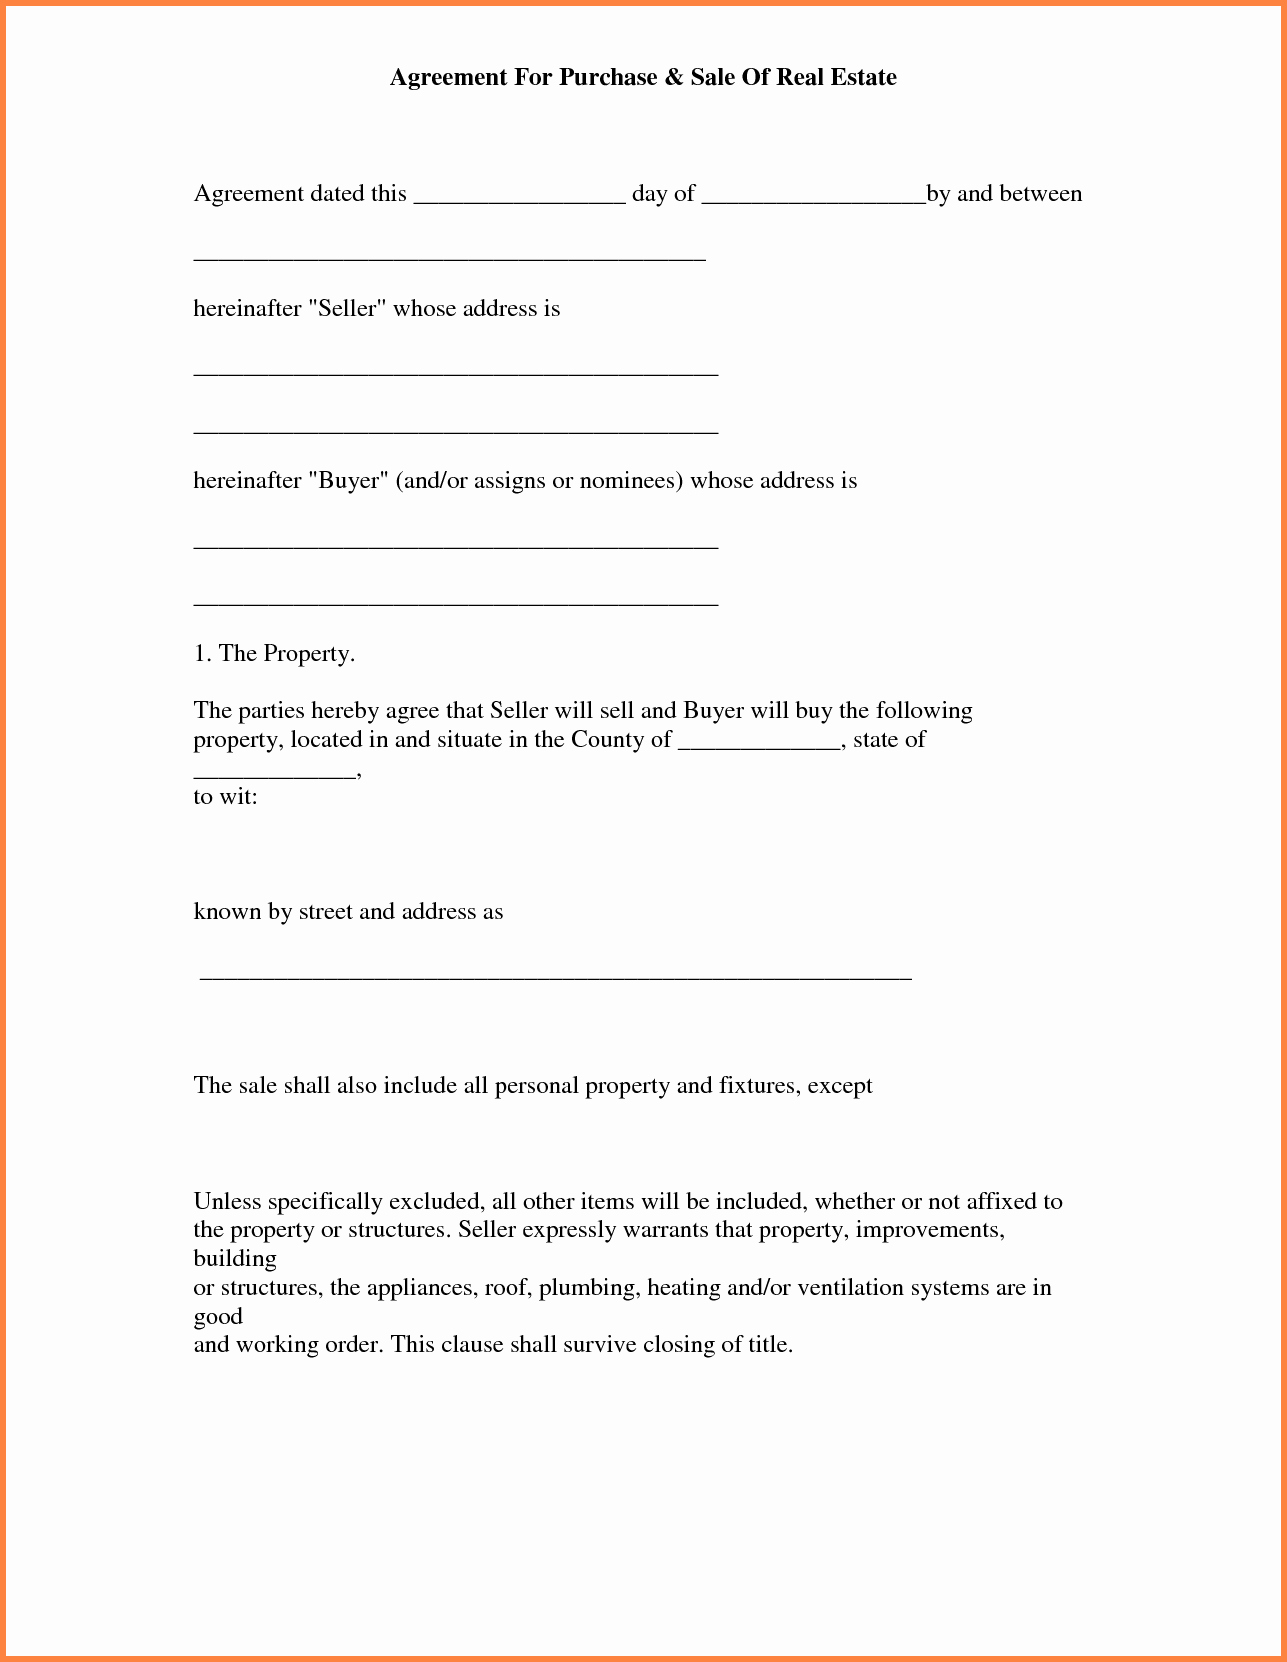 Free Purchase Agreement Template New Free Real Estate Purchase and Sale Agreement Template